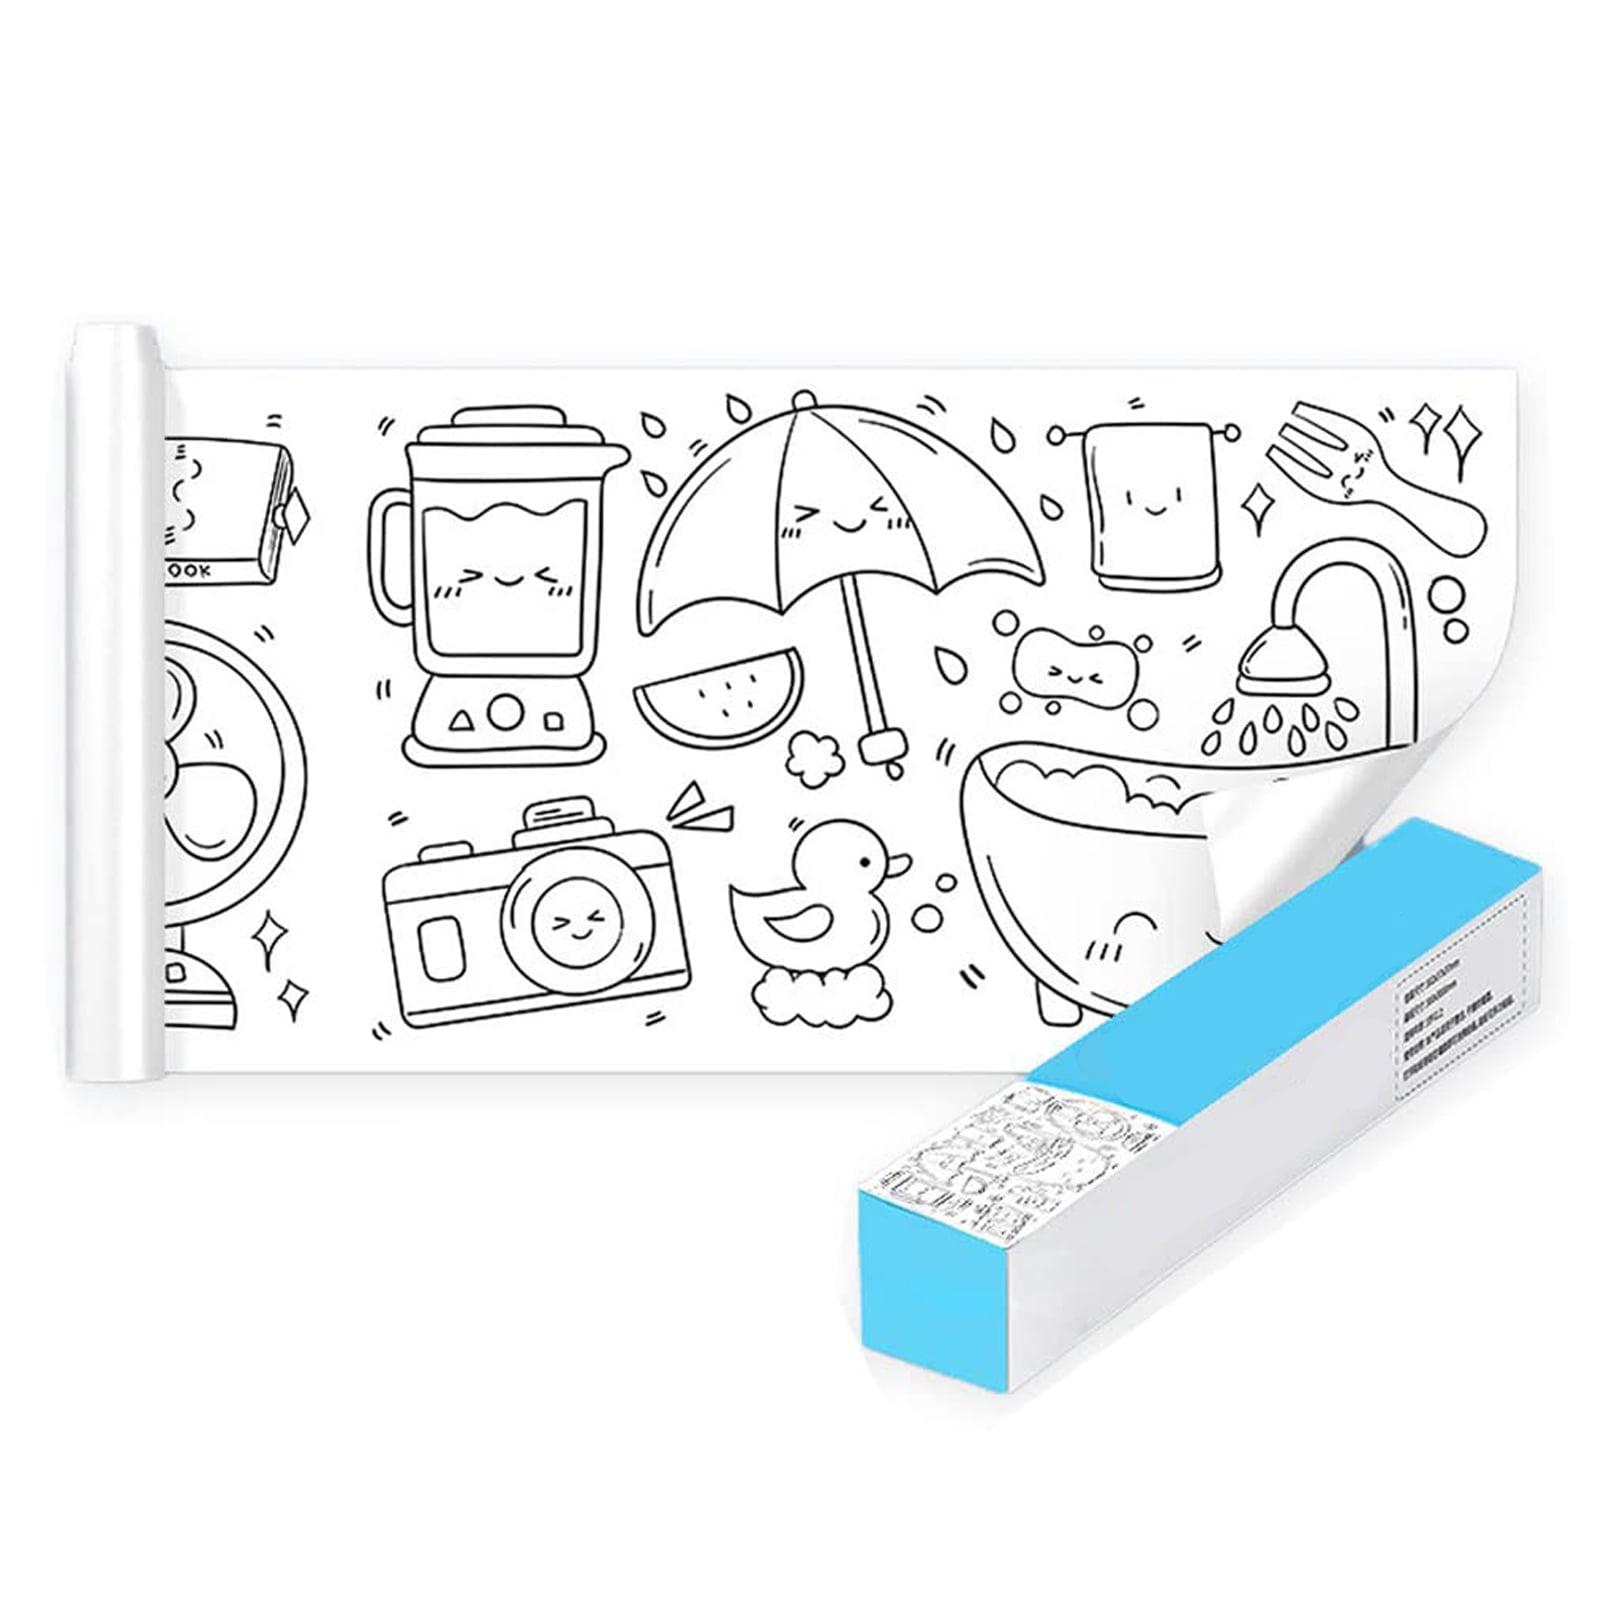 Children's Drawing Roll - Coloring Paper Roll for Kids, Drawing Paper Roll DIY Painting Drawing Color Filling Paper, 118 * 11.8 Inches, Size: Sea